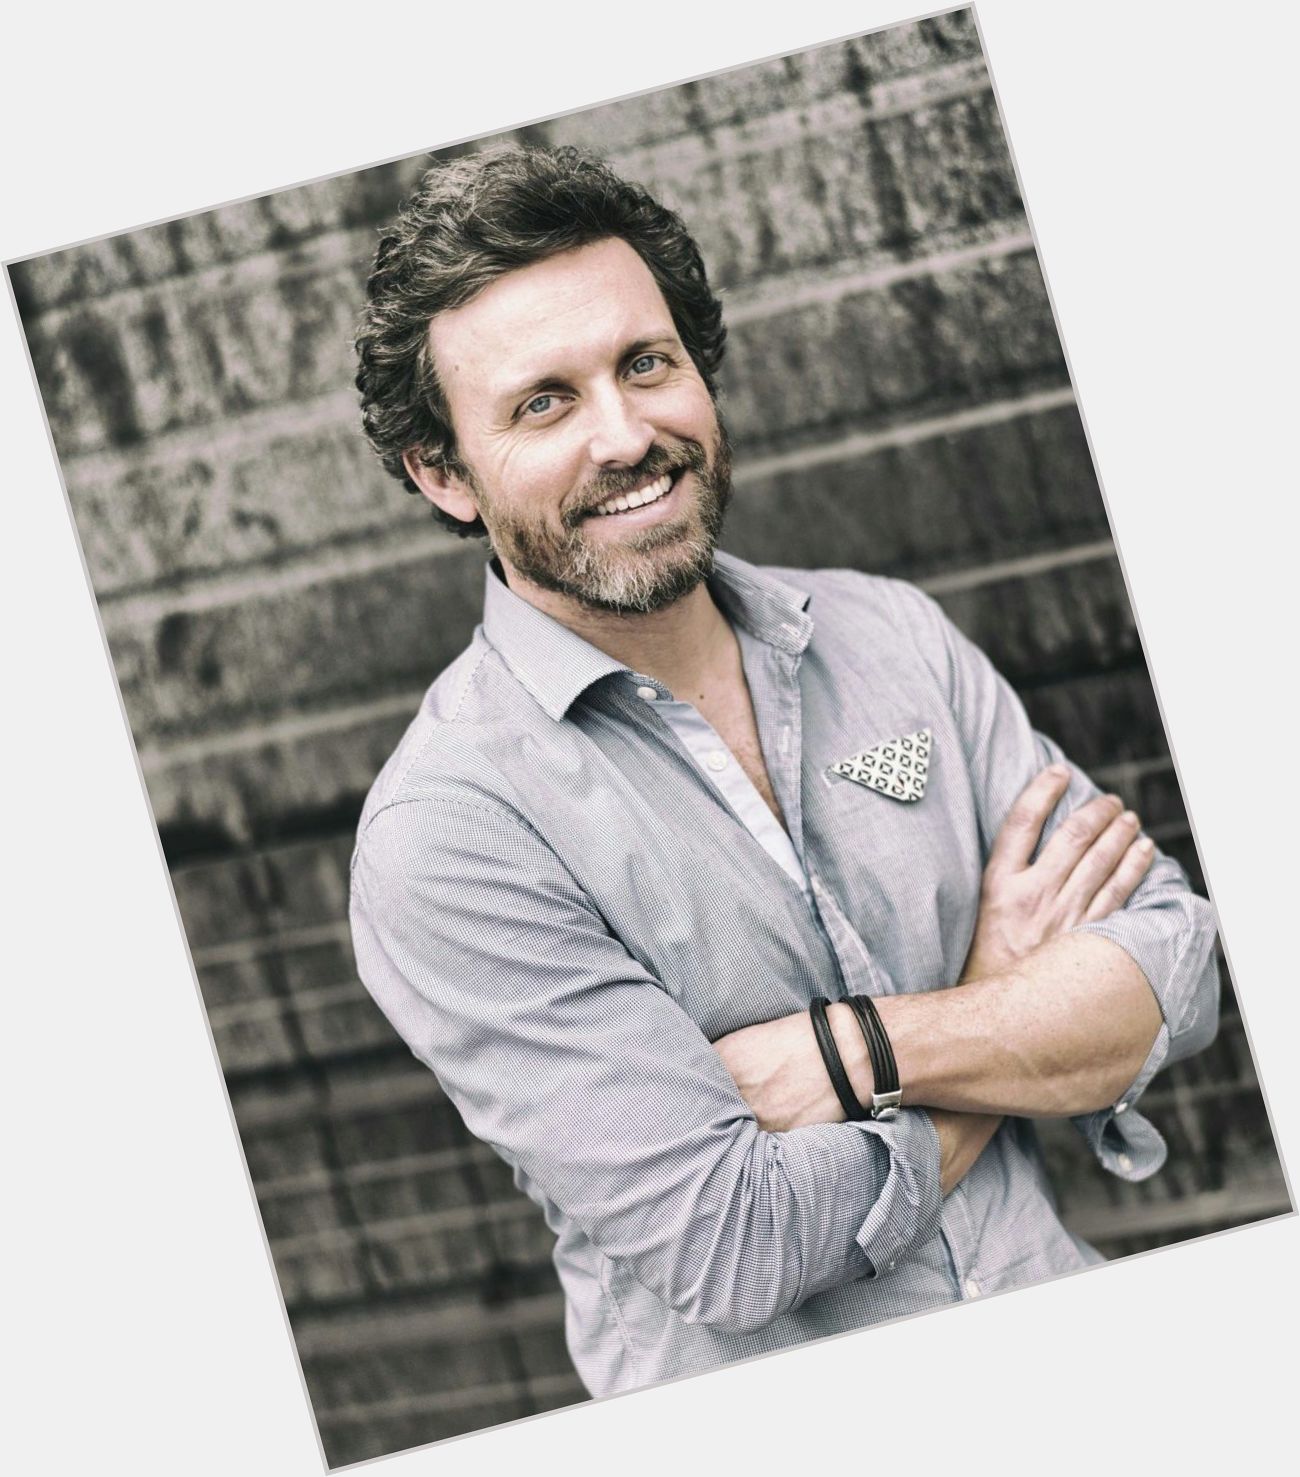 <a href="/hot-men/rob-benedict/is-he-married-coming-back-supernatural-tall-god">Rob Benedict</a>  